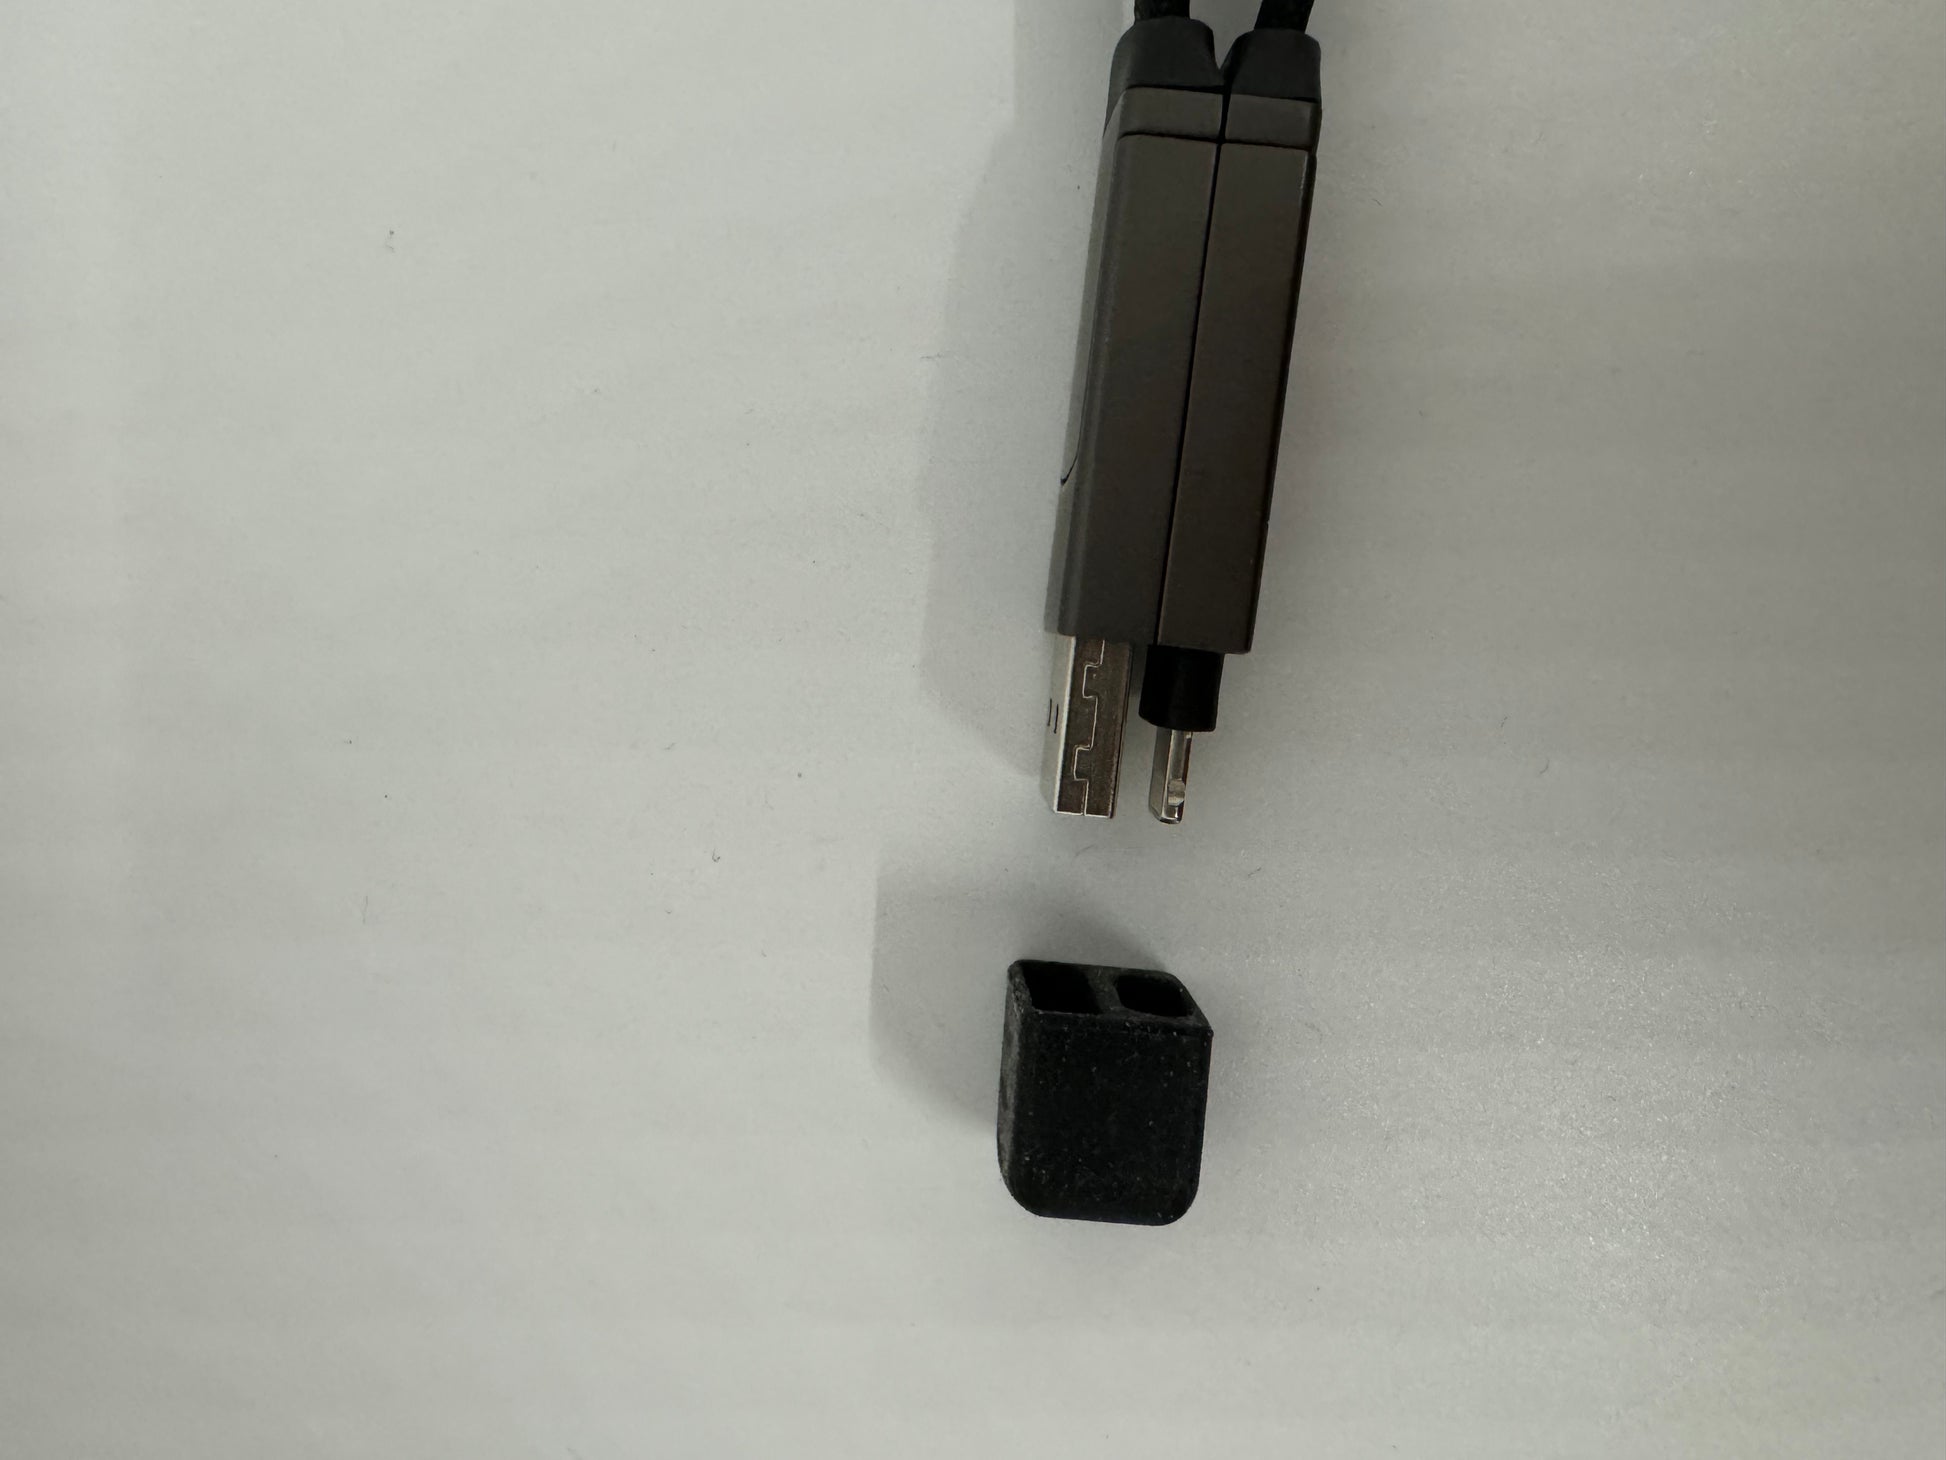 The picture shows two objects on a white surface. On the right side, there are two black cables with connectors at the end. The connectors are rectangular and metallic with a small protrusion on one side. On the bottom right corner, there is a small black object that looks like a cap or cover. It is rectangular with one of the shorter sides open. The surface of this object appears to be textured.